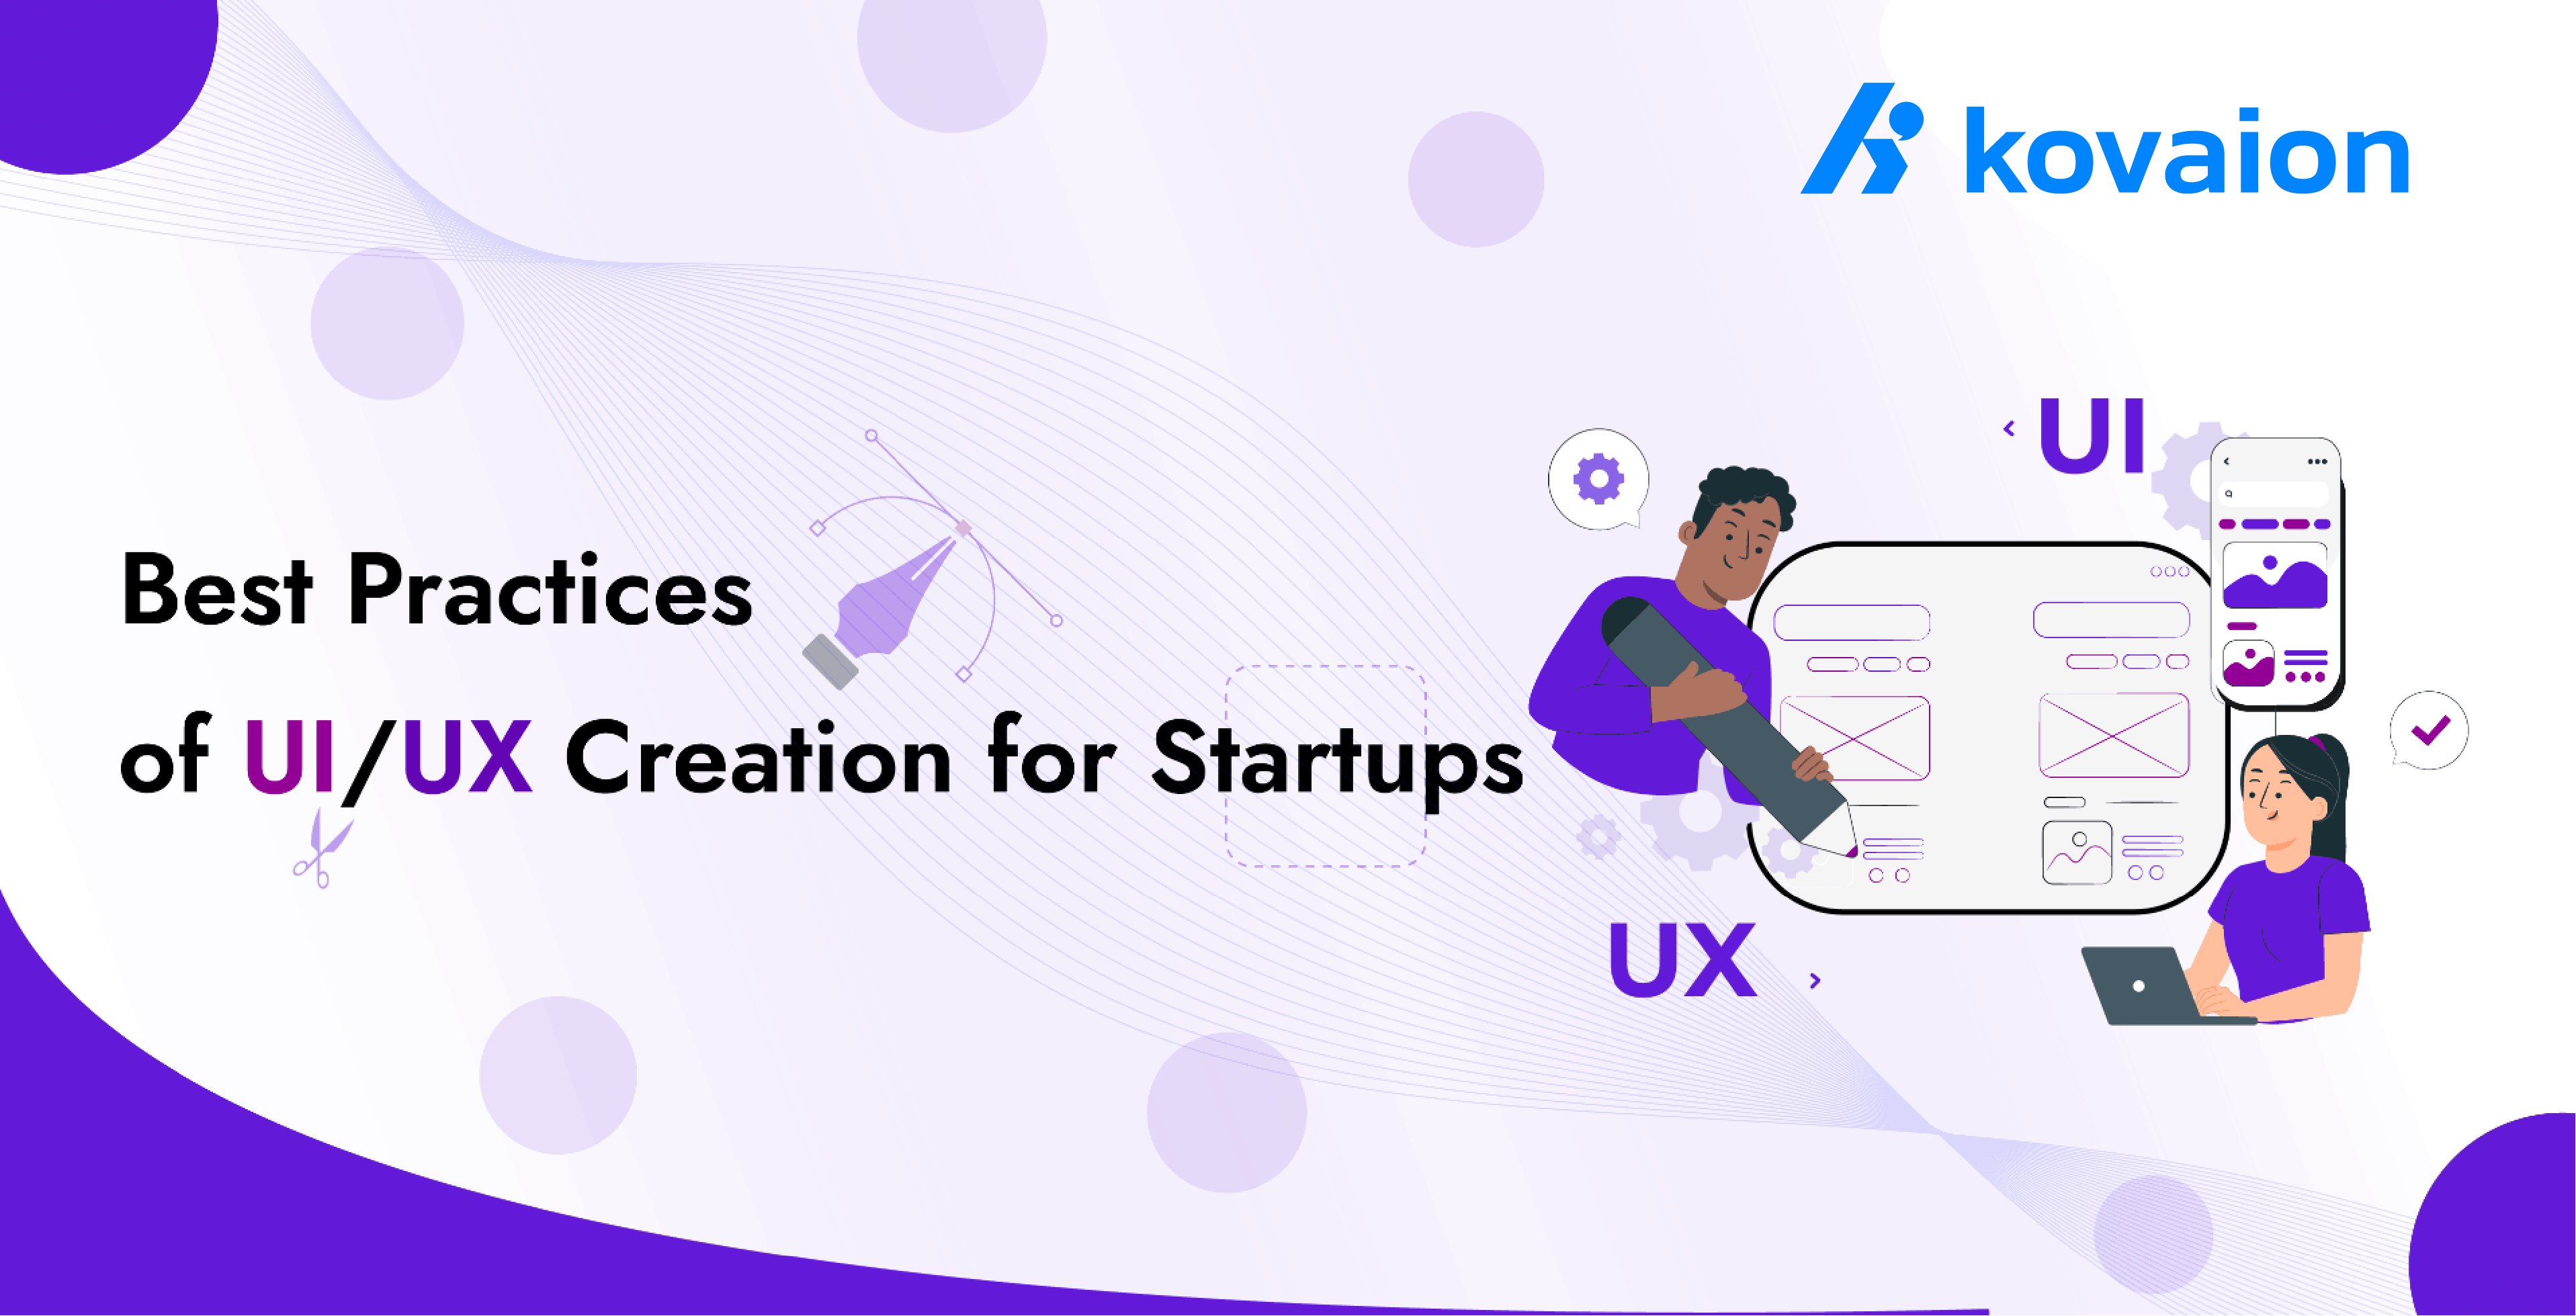 Best Practices of UI/UX Creation for Startups